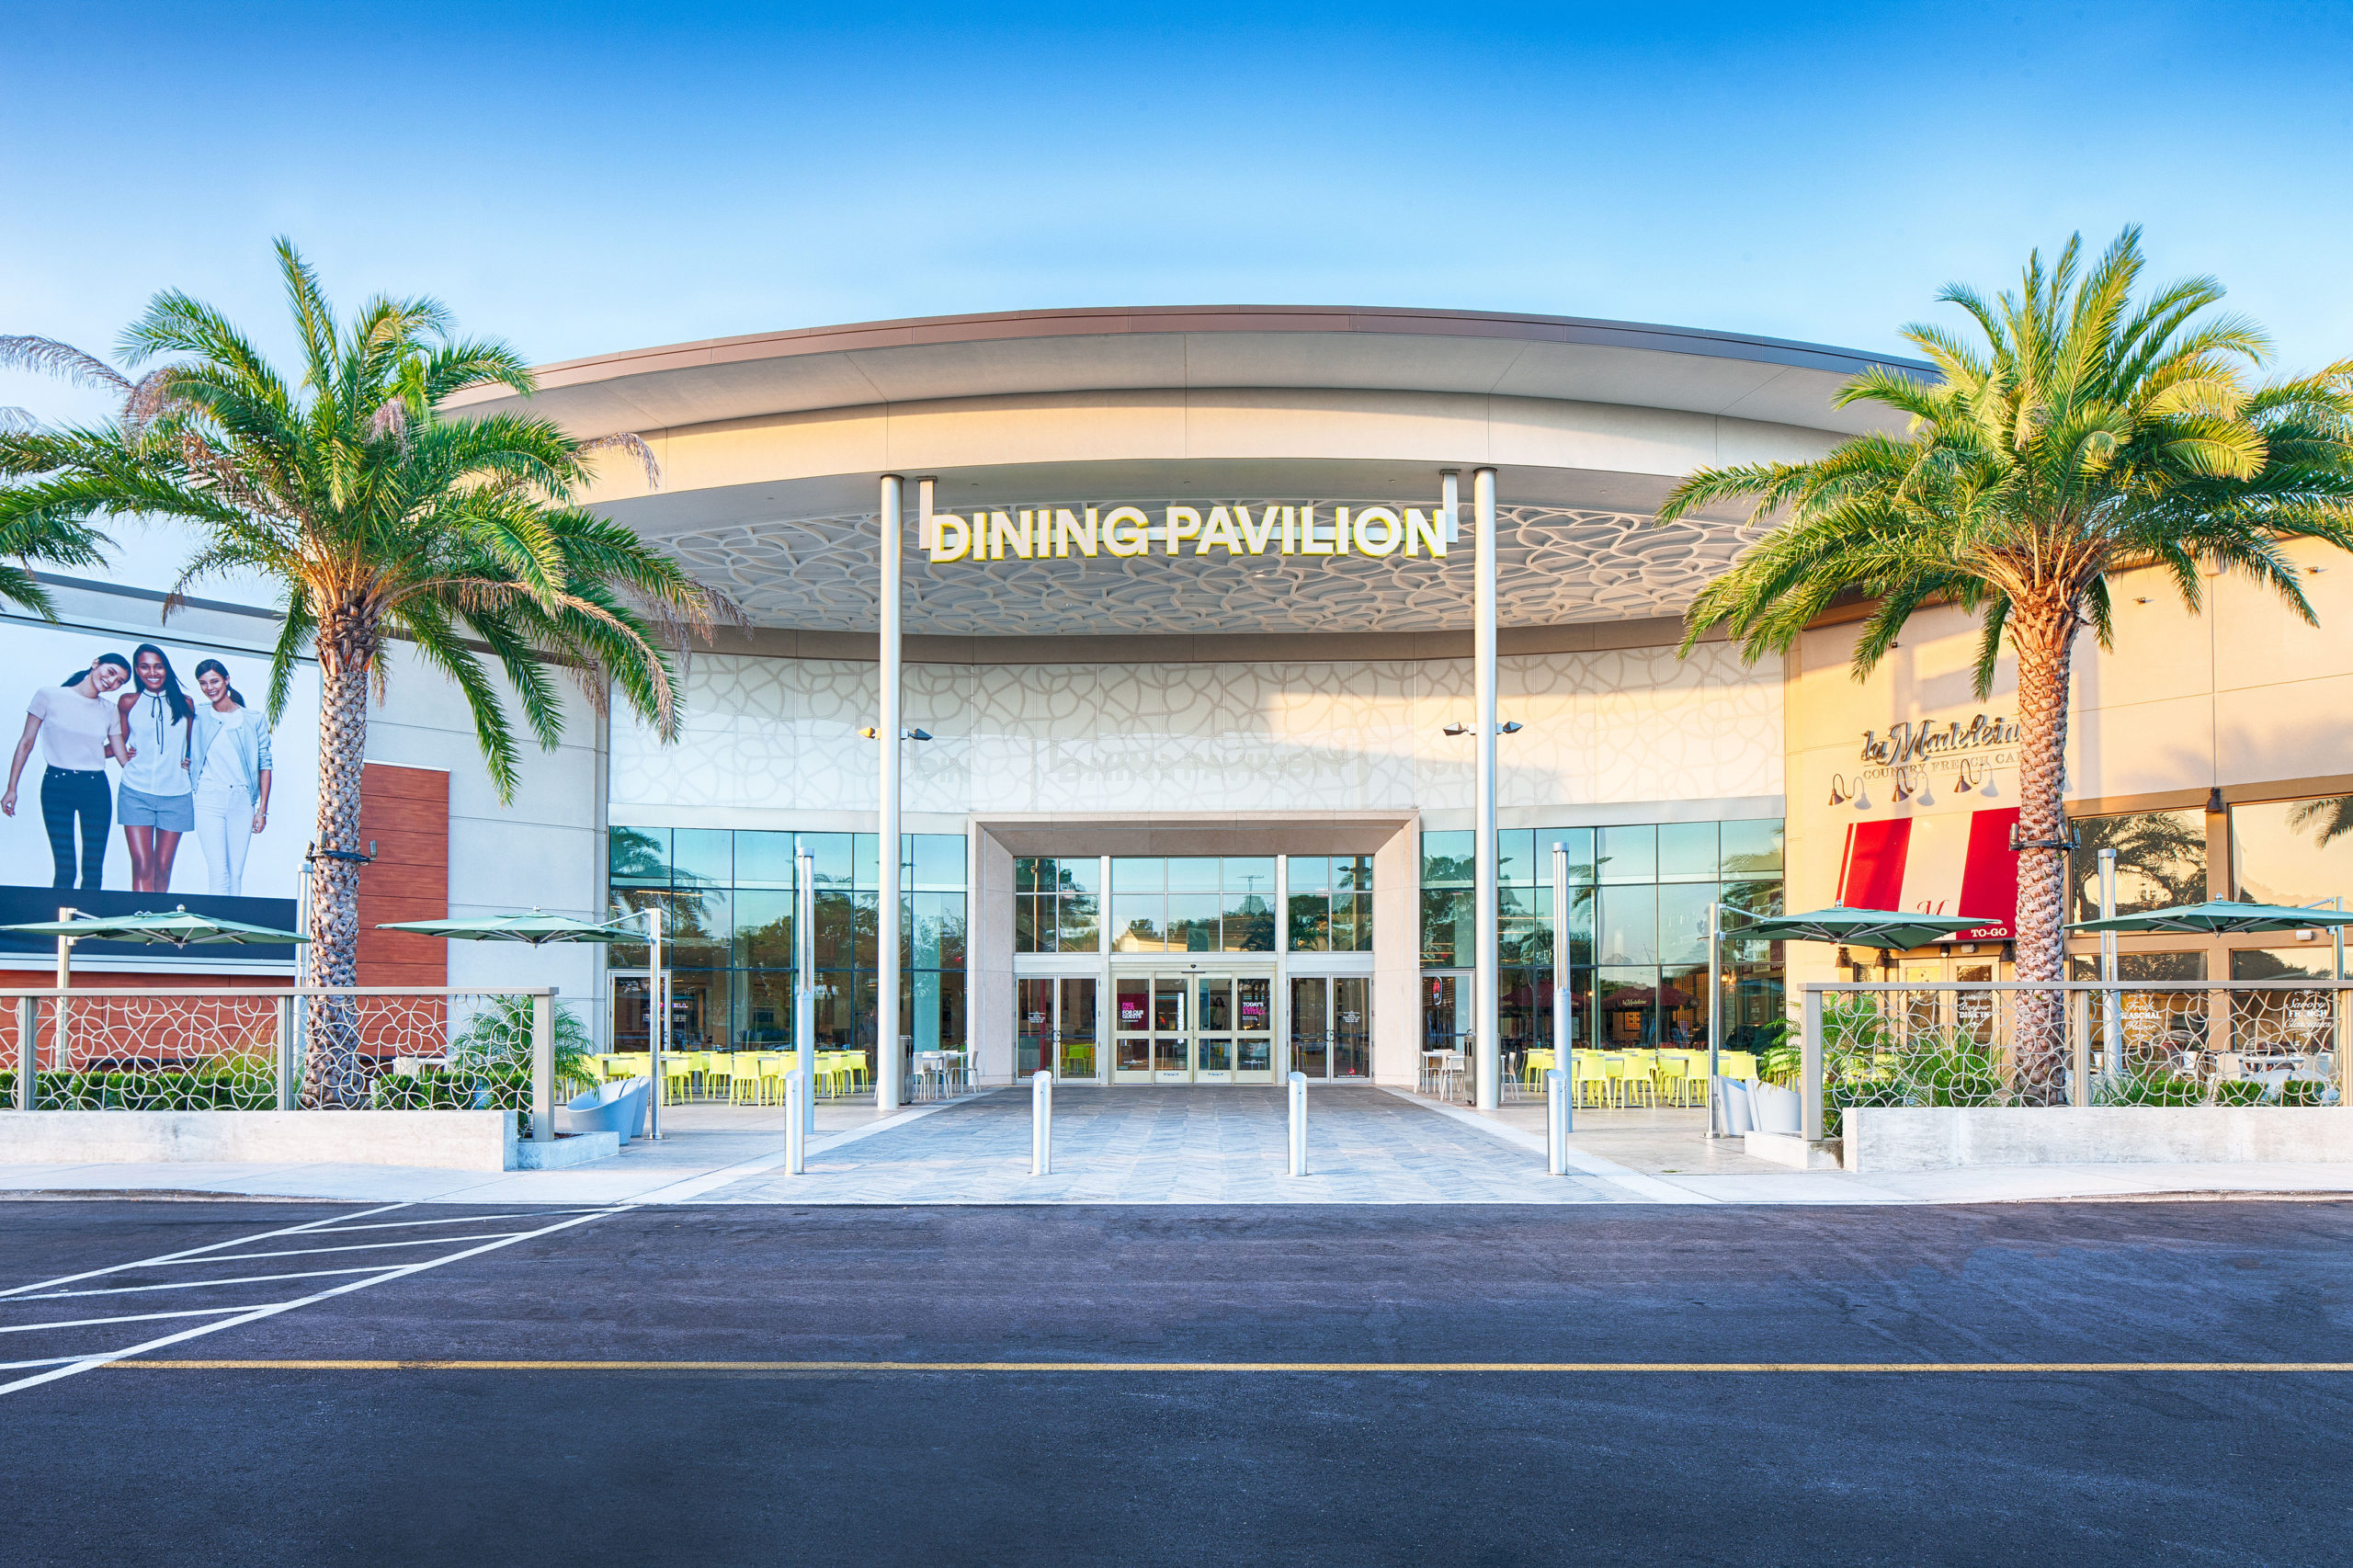 Florida Mall Dining Pavilion | Commercial Architects & Engineers | Cuhaci Peterson 2